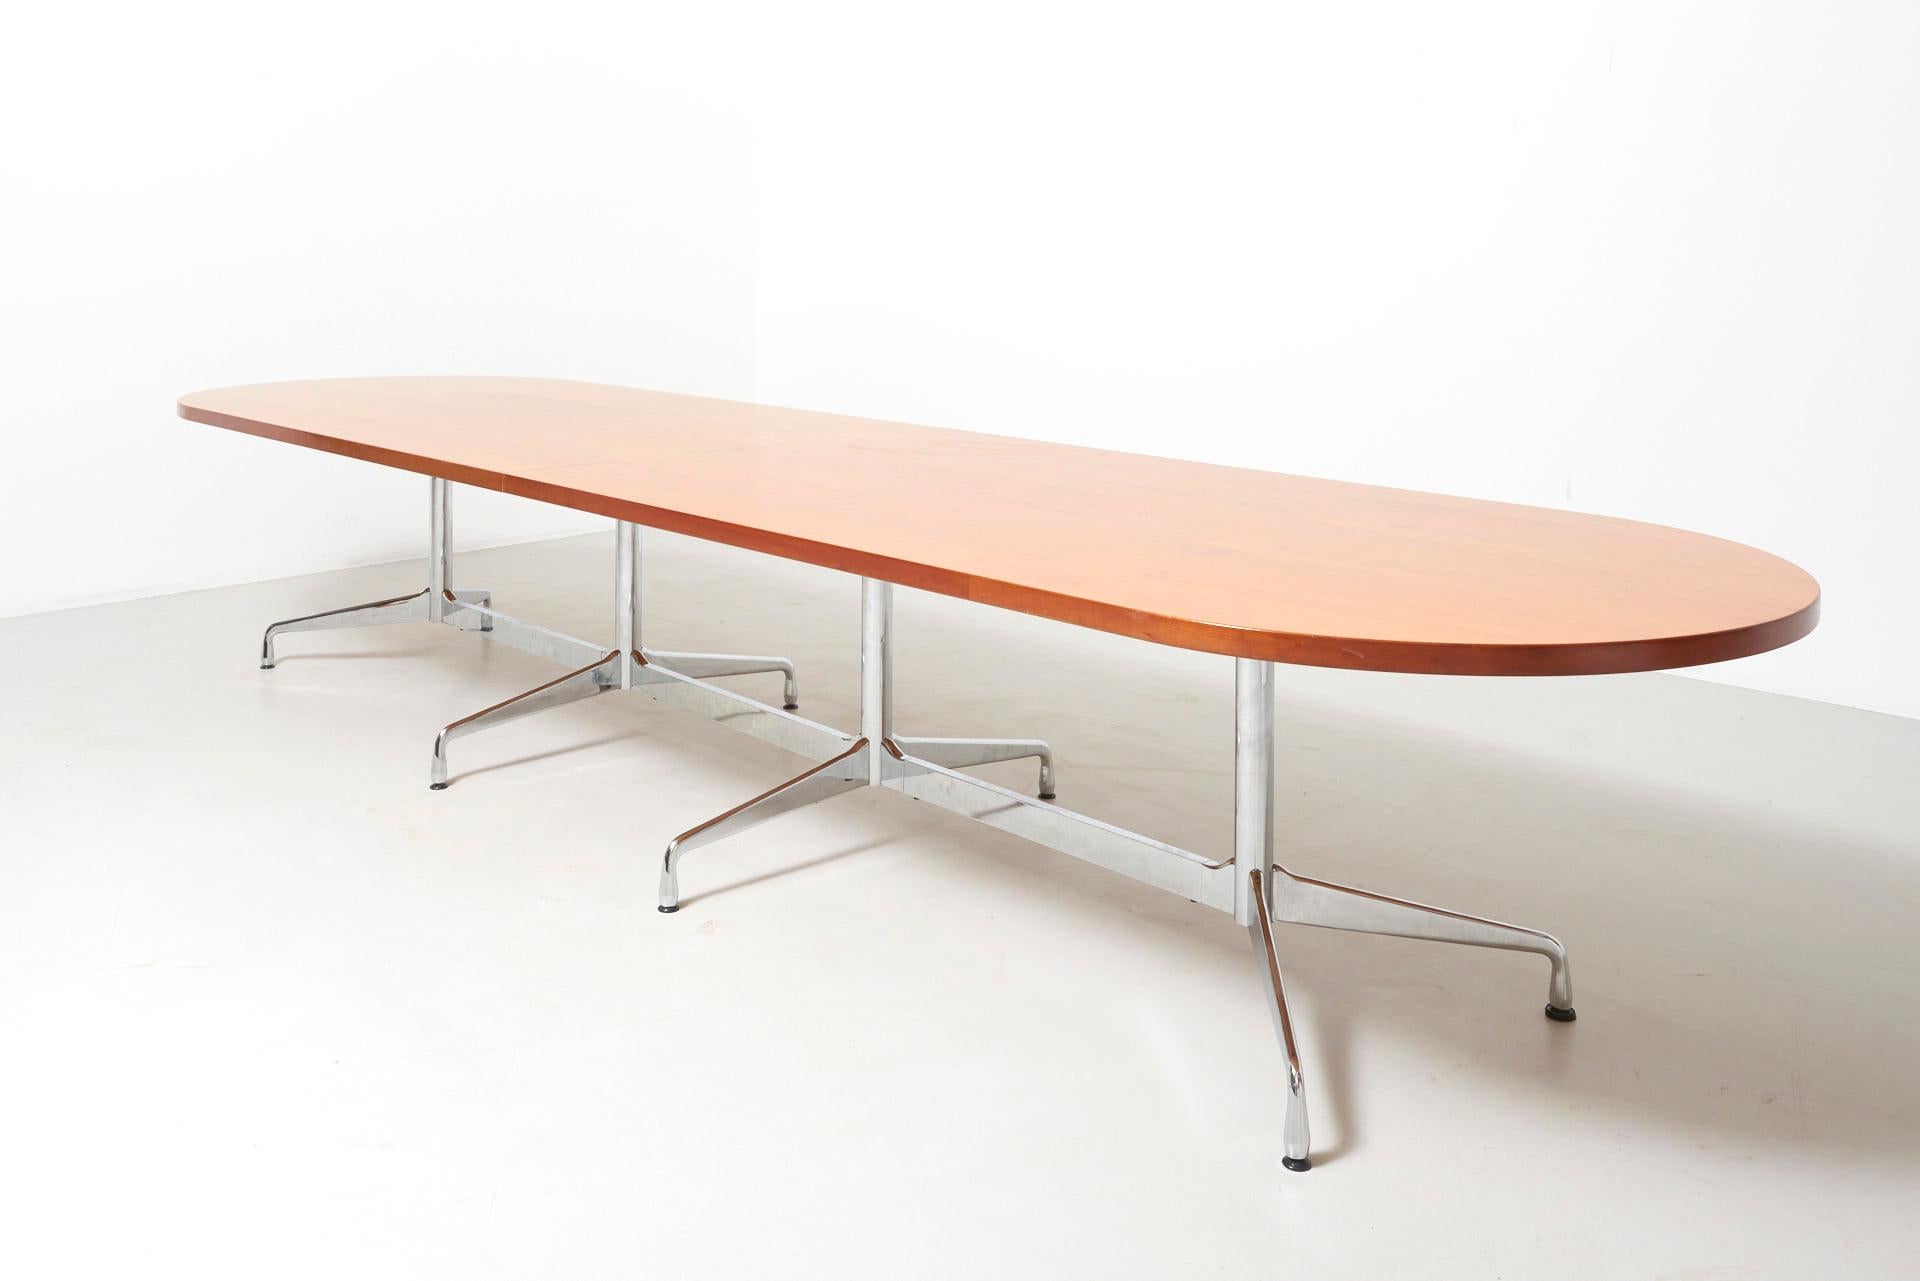 A large conference table in cherry veneer on a chrome base. Design by Charles and Ray Eames in the 1950s. This version of the segmented base table has 4 legs offering space for at least 16 people. The top is made of 2 parts which are fastened with